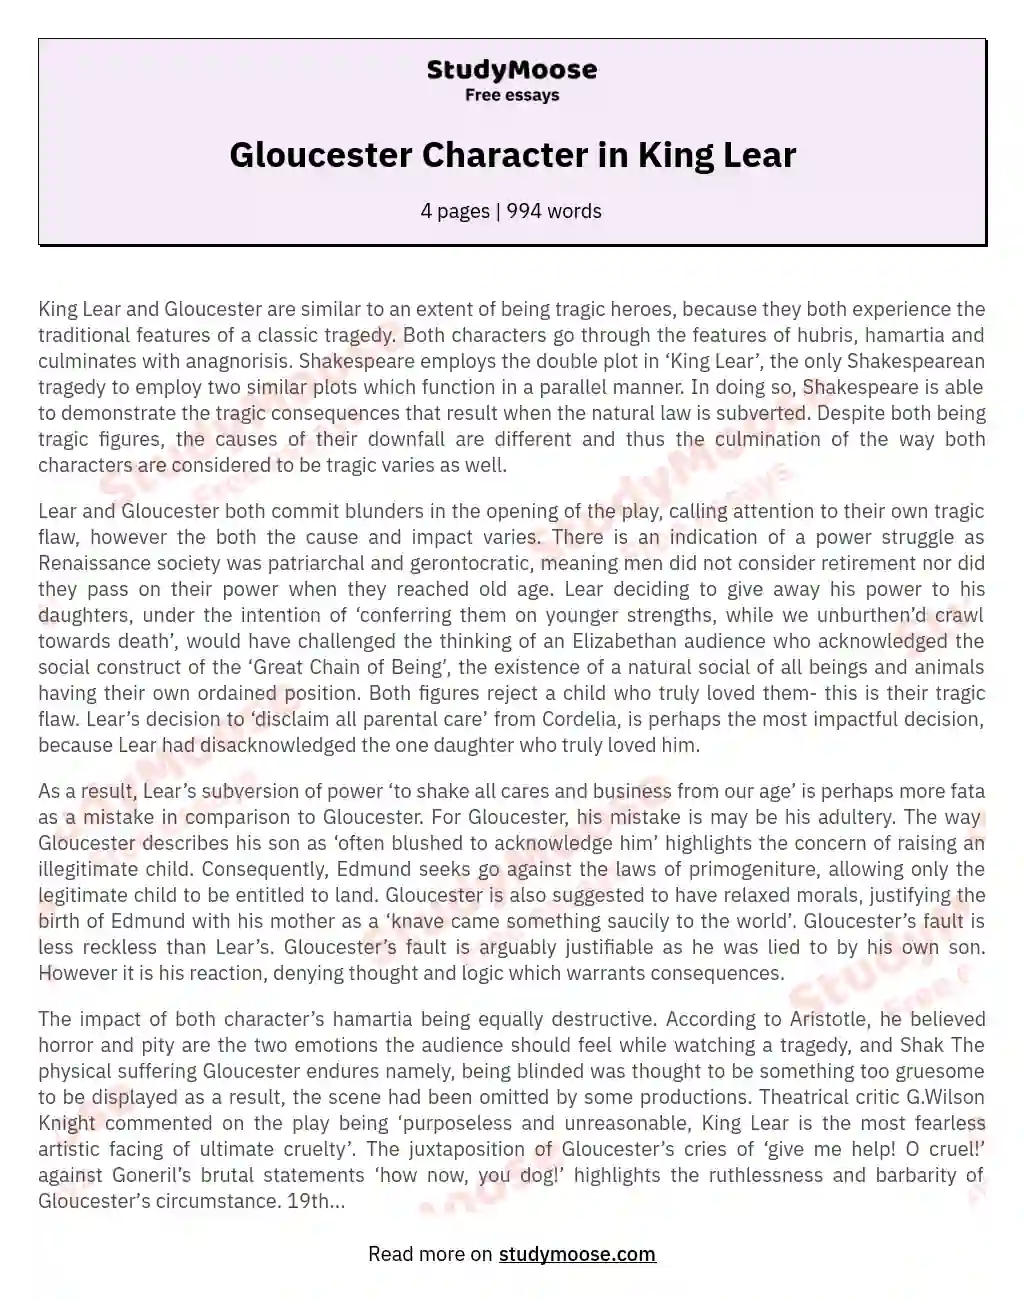 Gloucester Character in King Lear essay